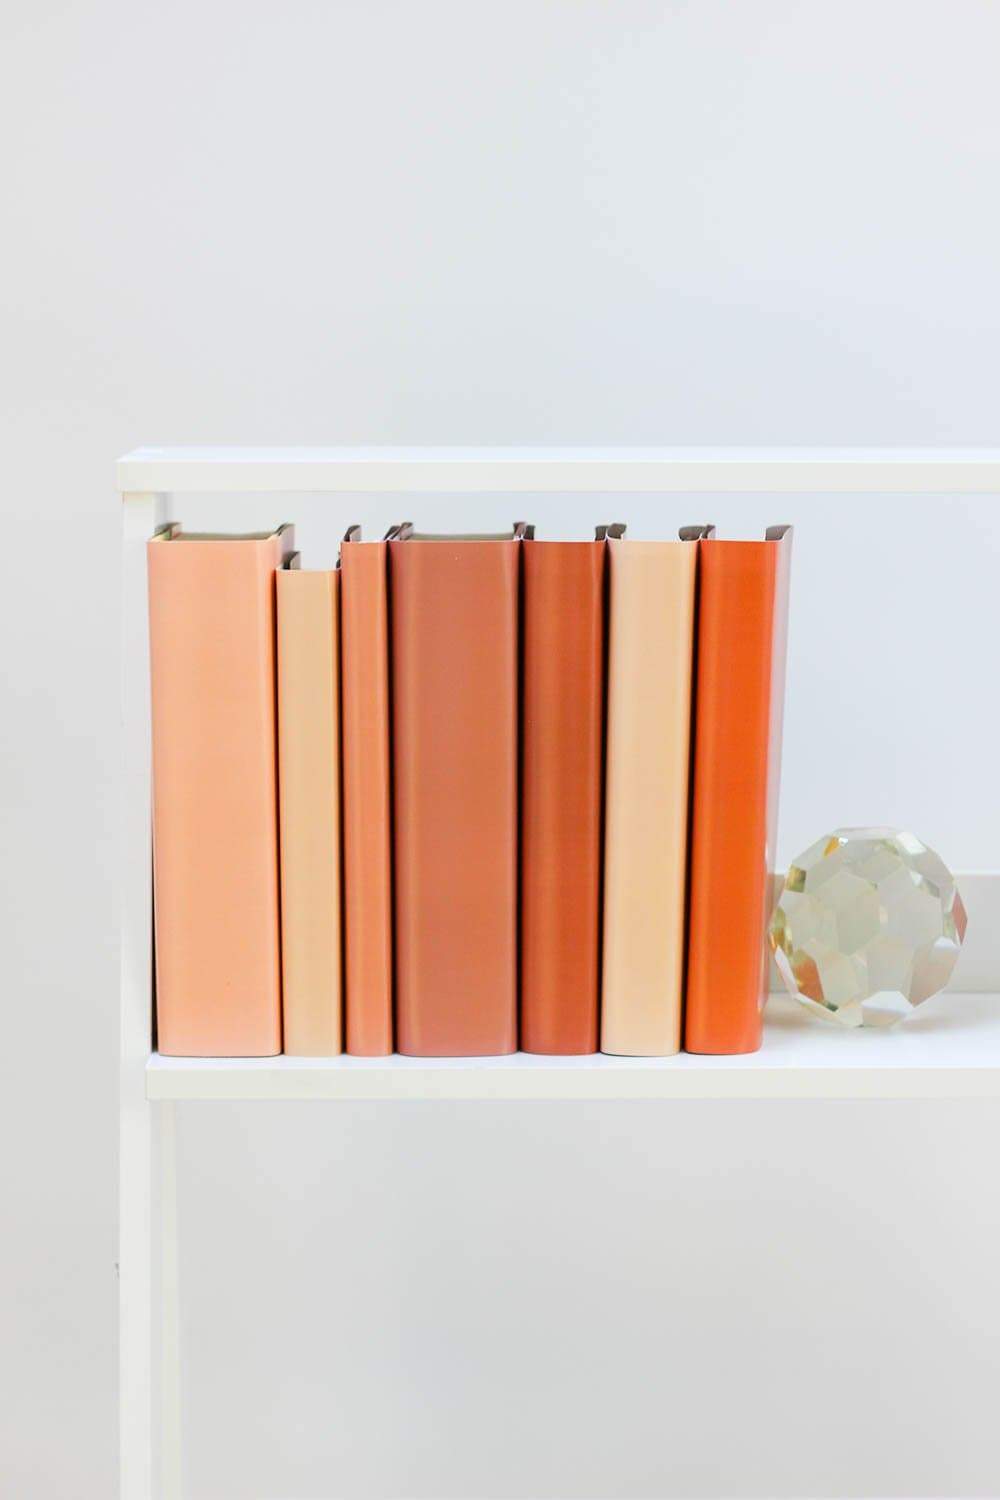 Set of styled nude books made with nude book covers